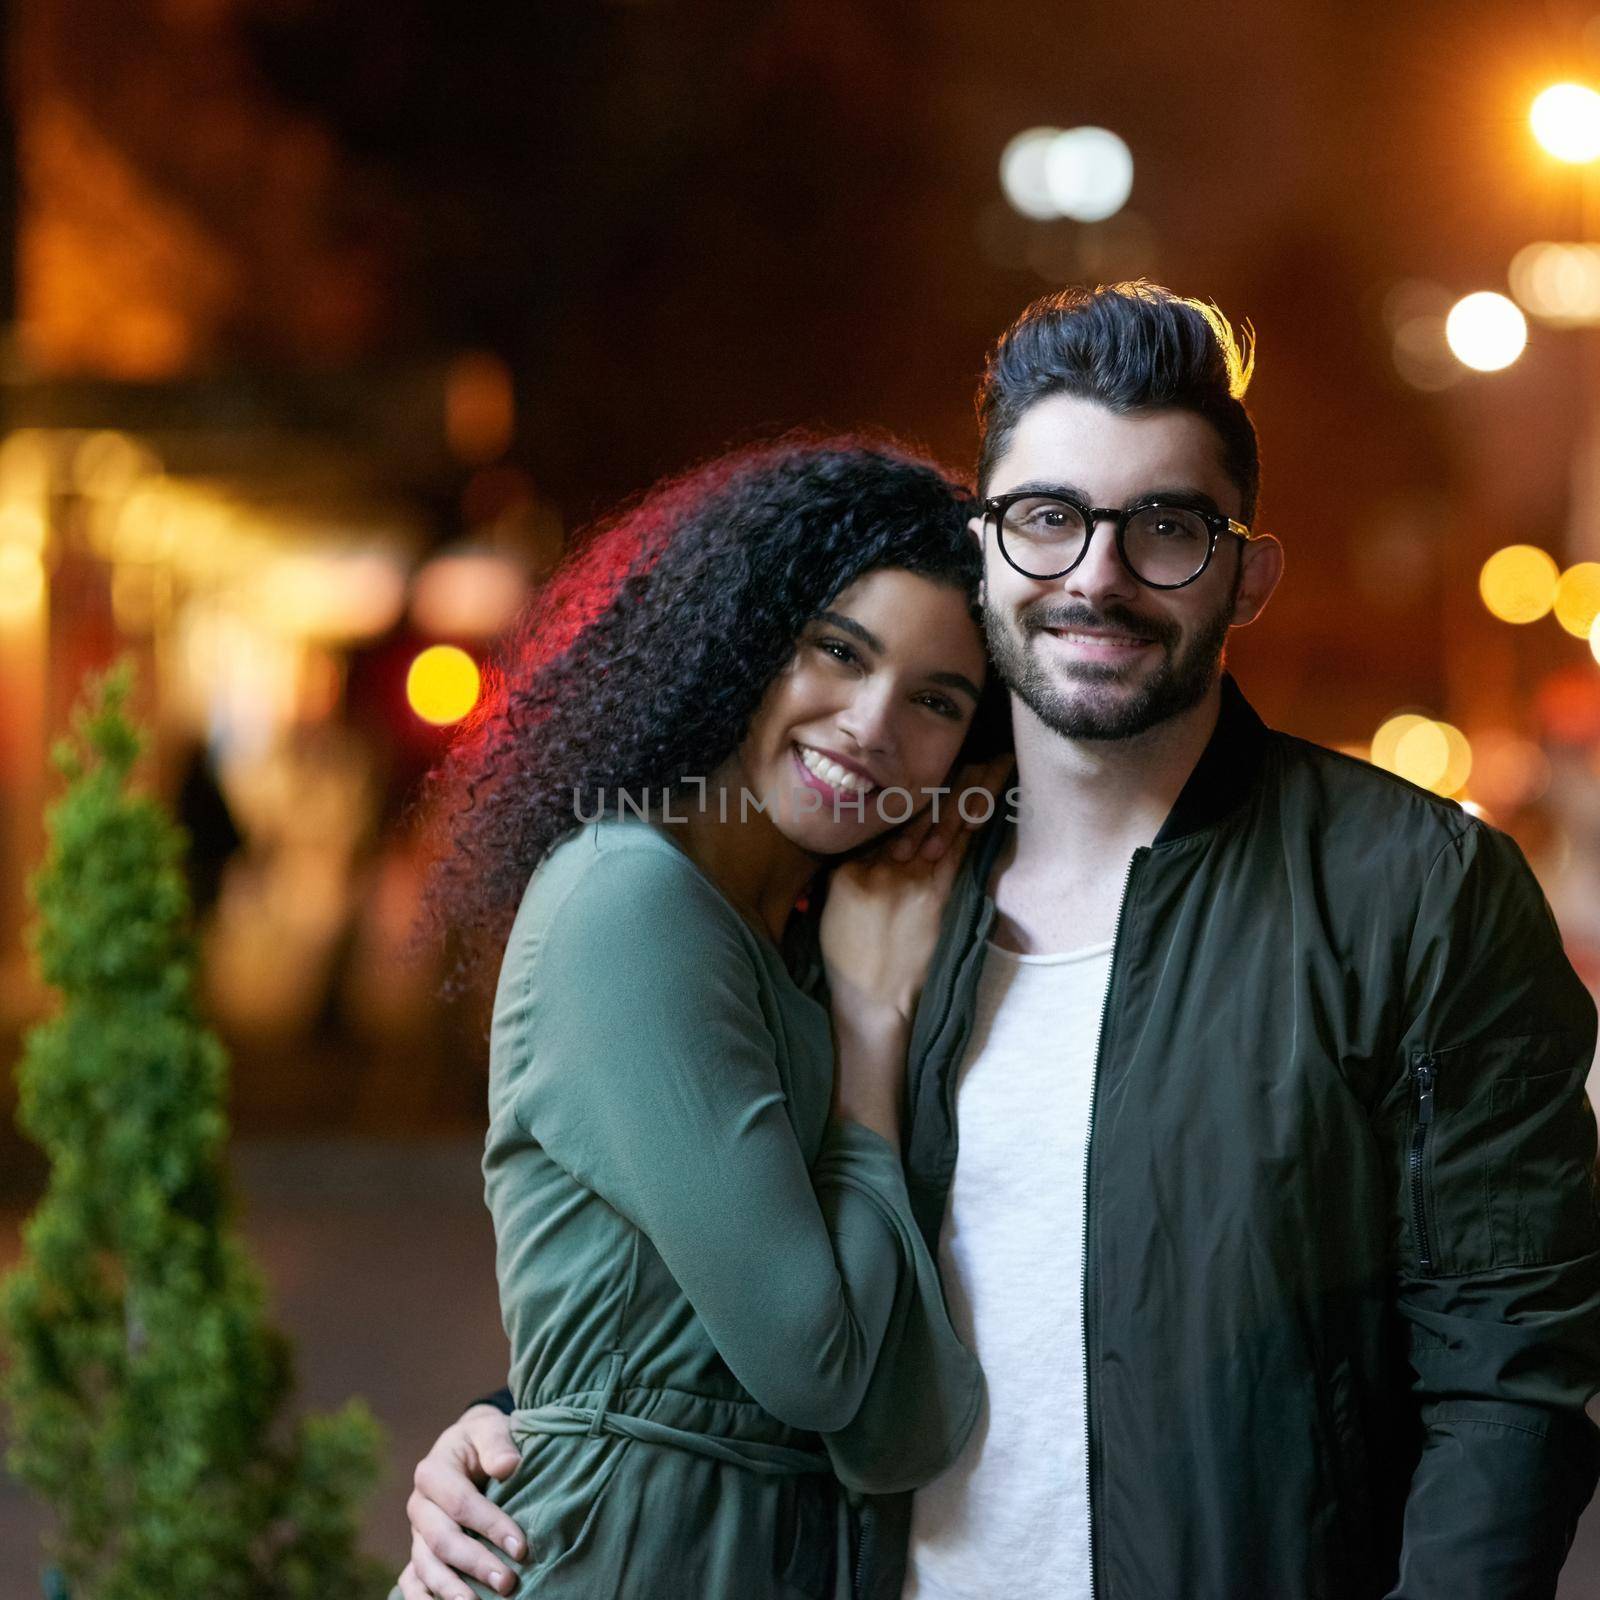 Portrait of a happy young couple outdoors at night.